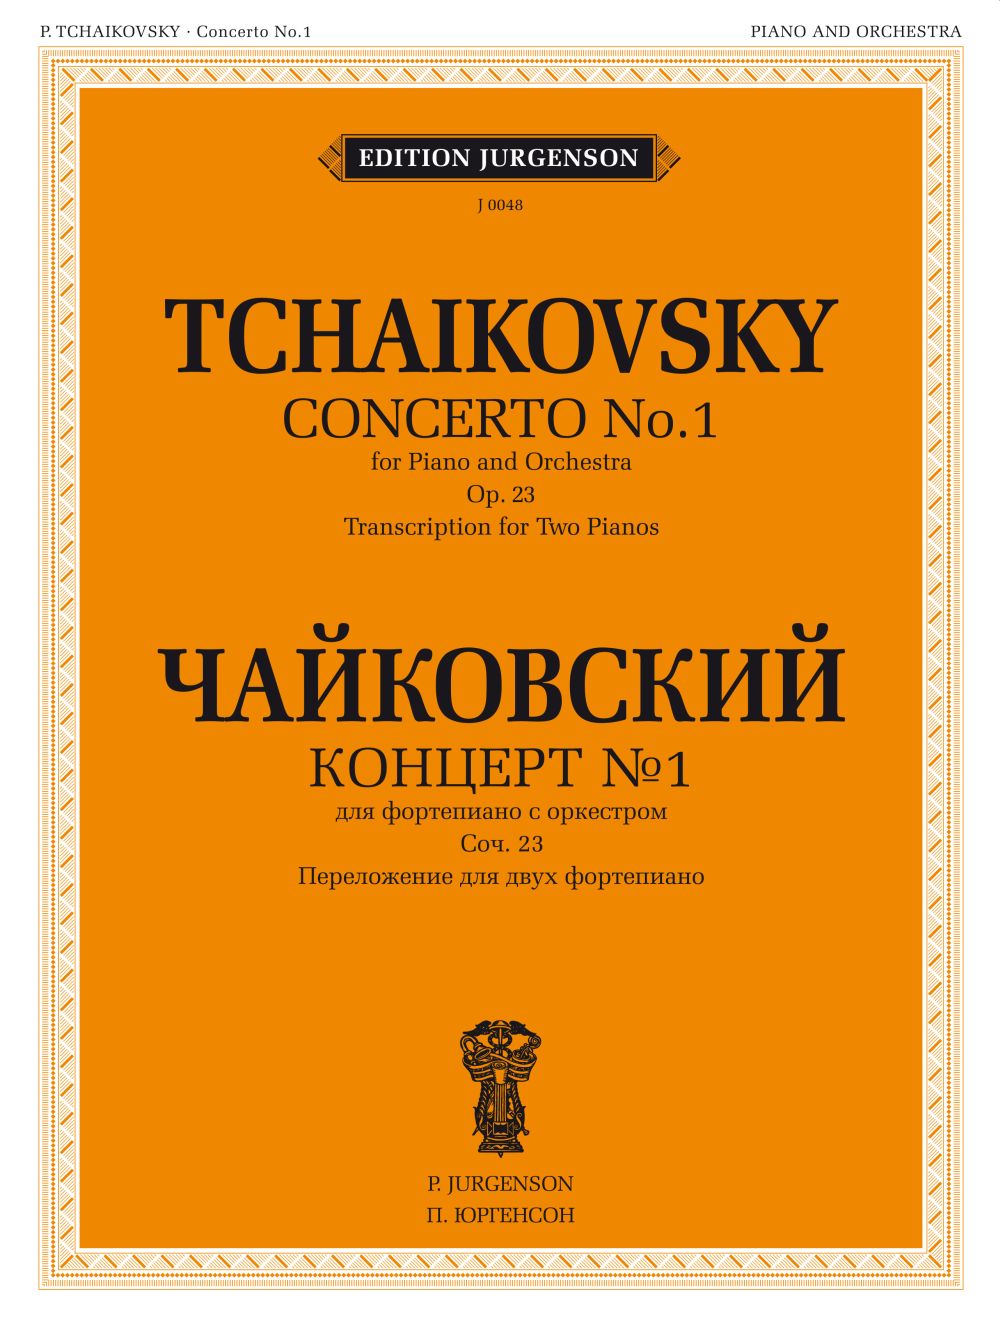 Concerto No 1, Op. 23 For Piano And Orchestra (TCHAIKOVSKY PYOTR ILYICH)